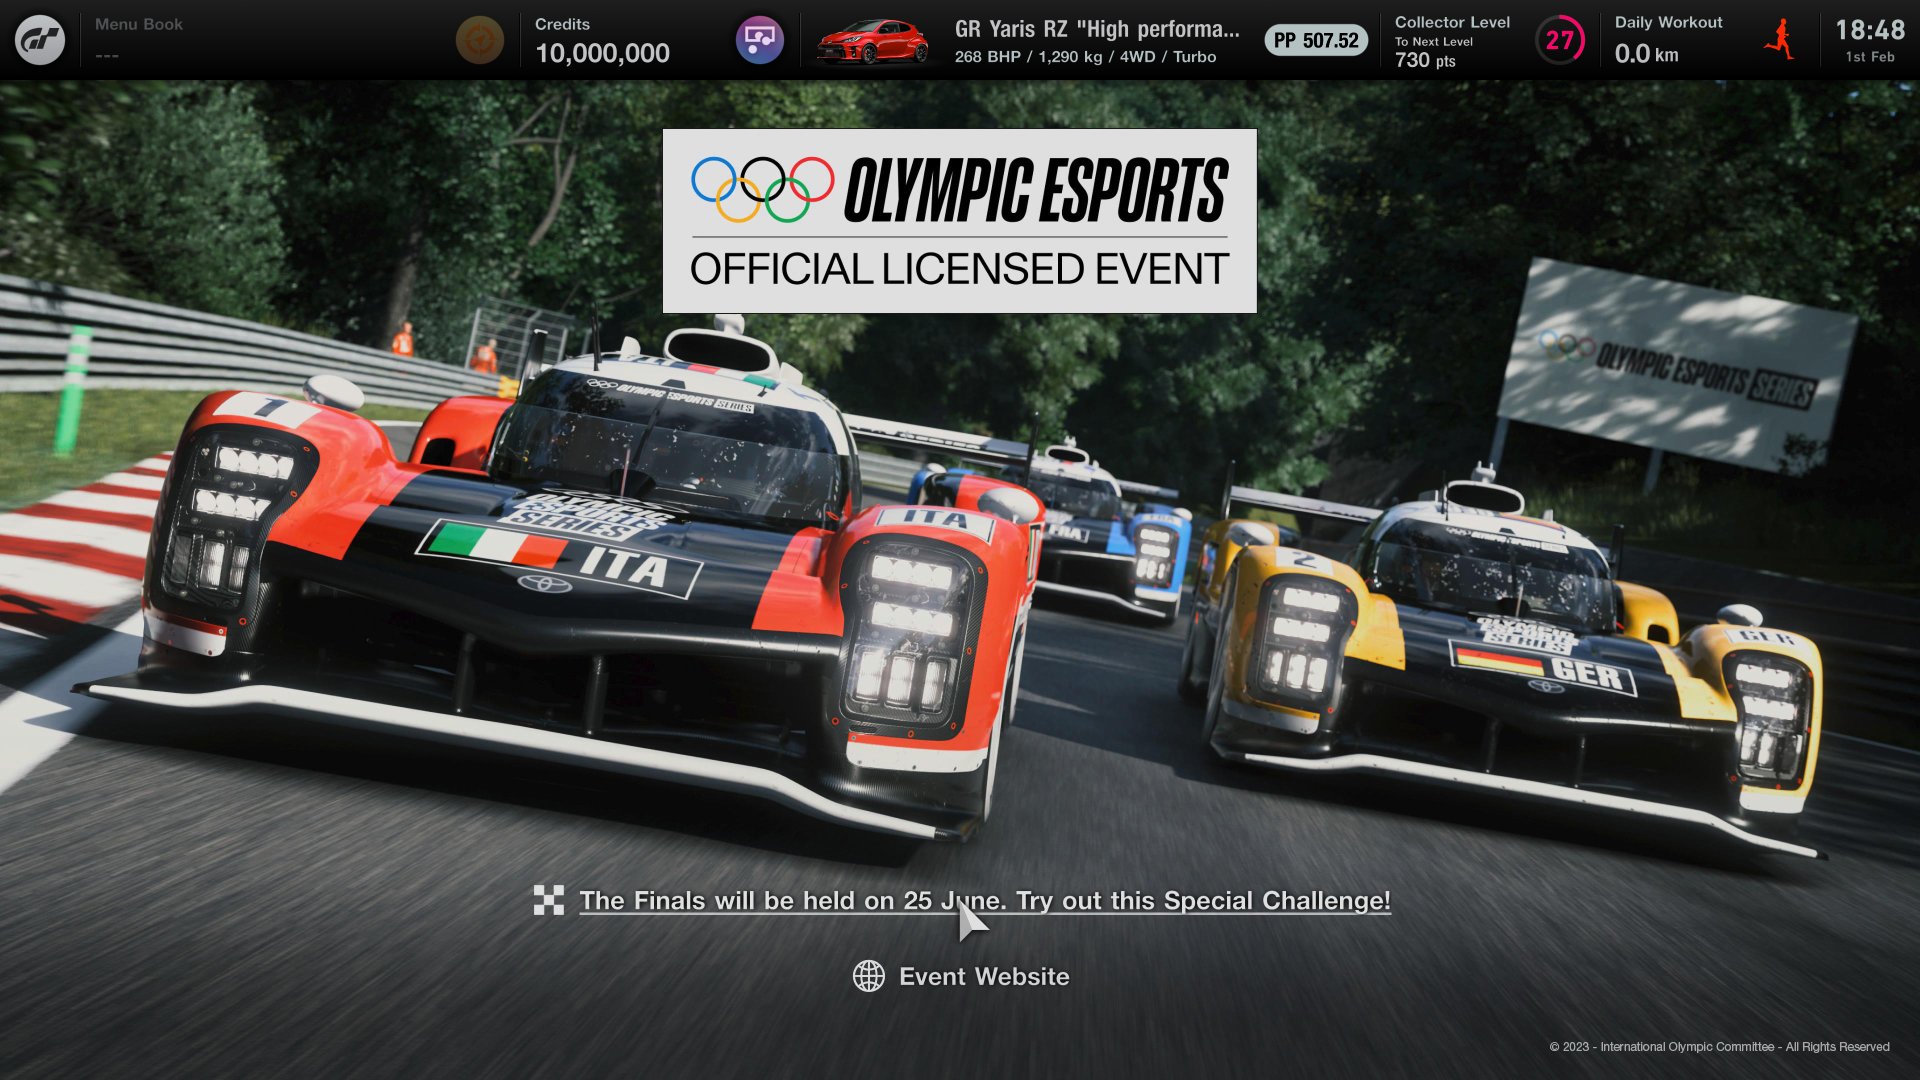 More information about "Olympic Esports Series 2023 Motor Sport Event Finals [25 giugno ore 6]"